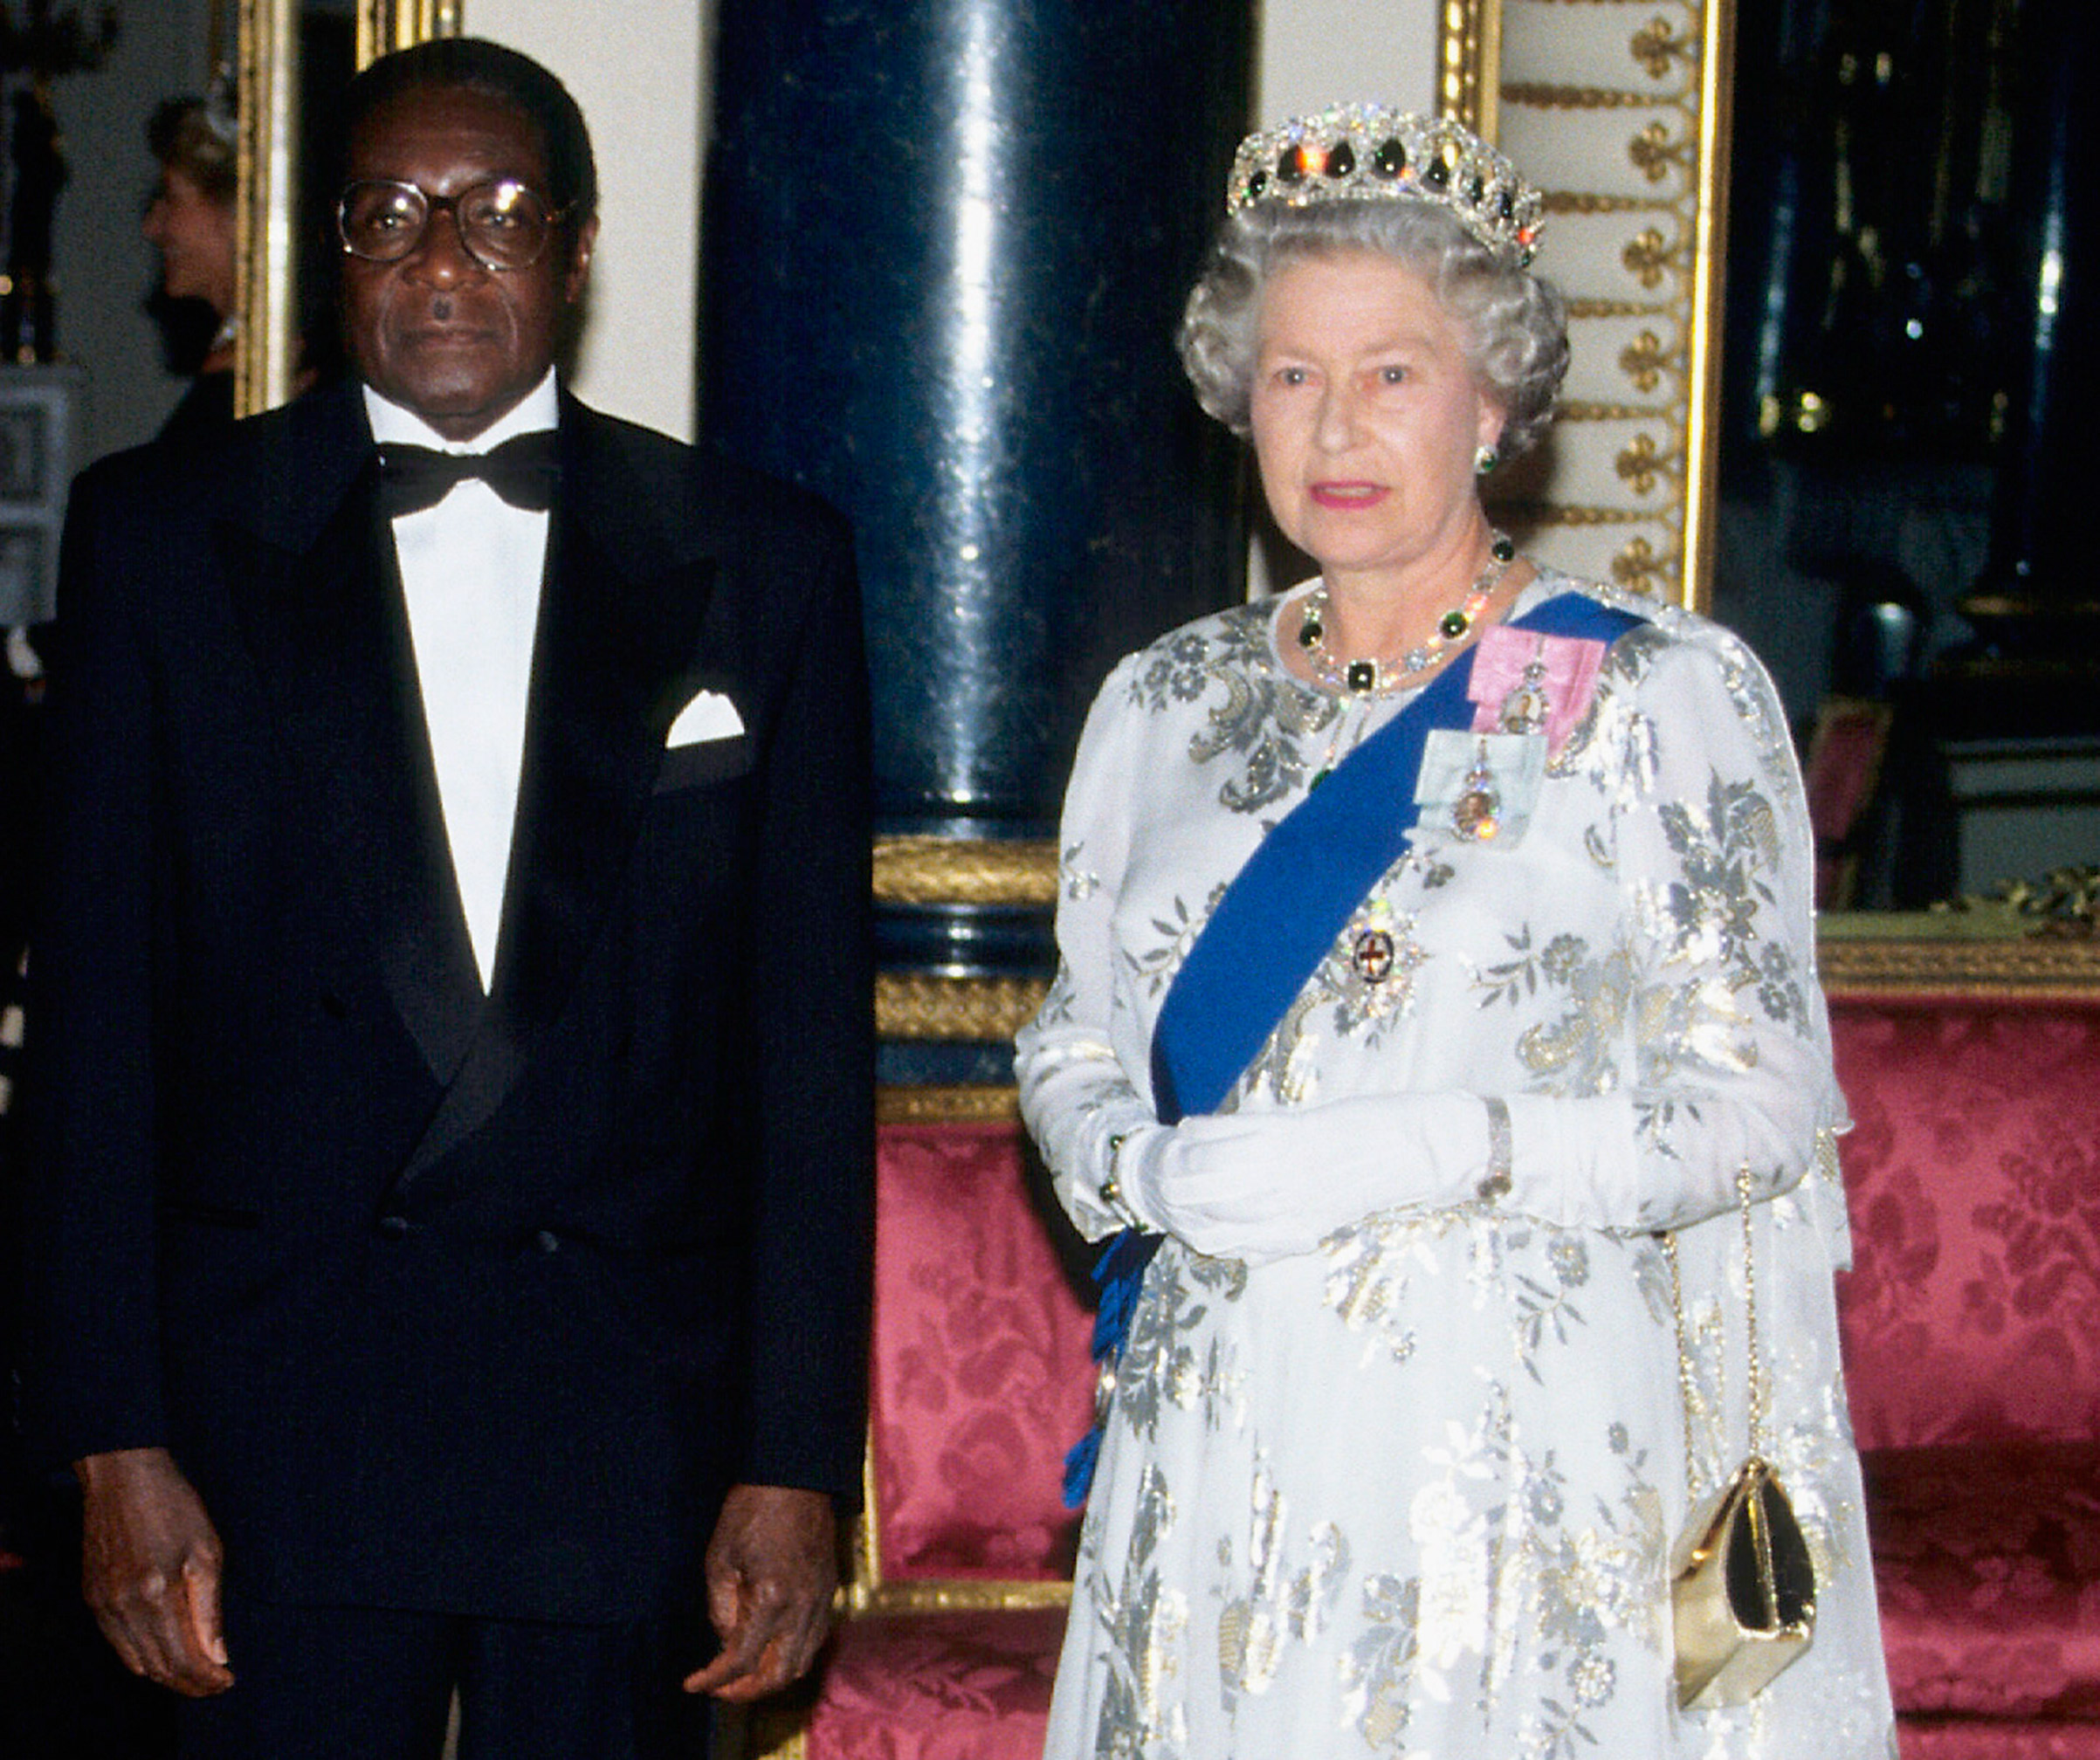 President Robert Mugabe of Zimbabwe and Queen Elizabeth ll at Buckingham Palace, London, during his state visit in May 1994. (Anwar Hussein—Getty Images)